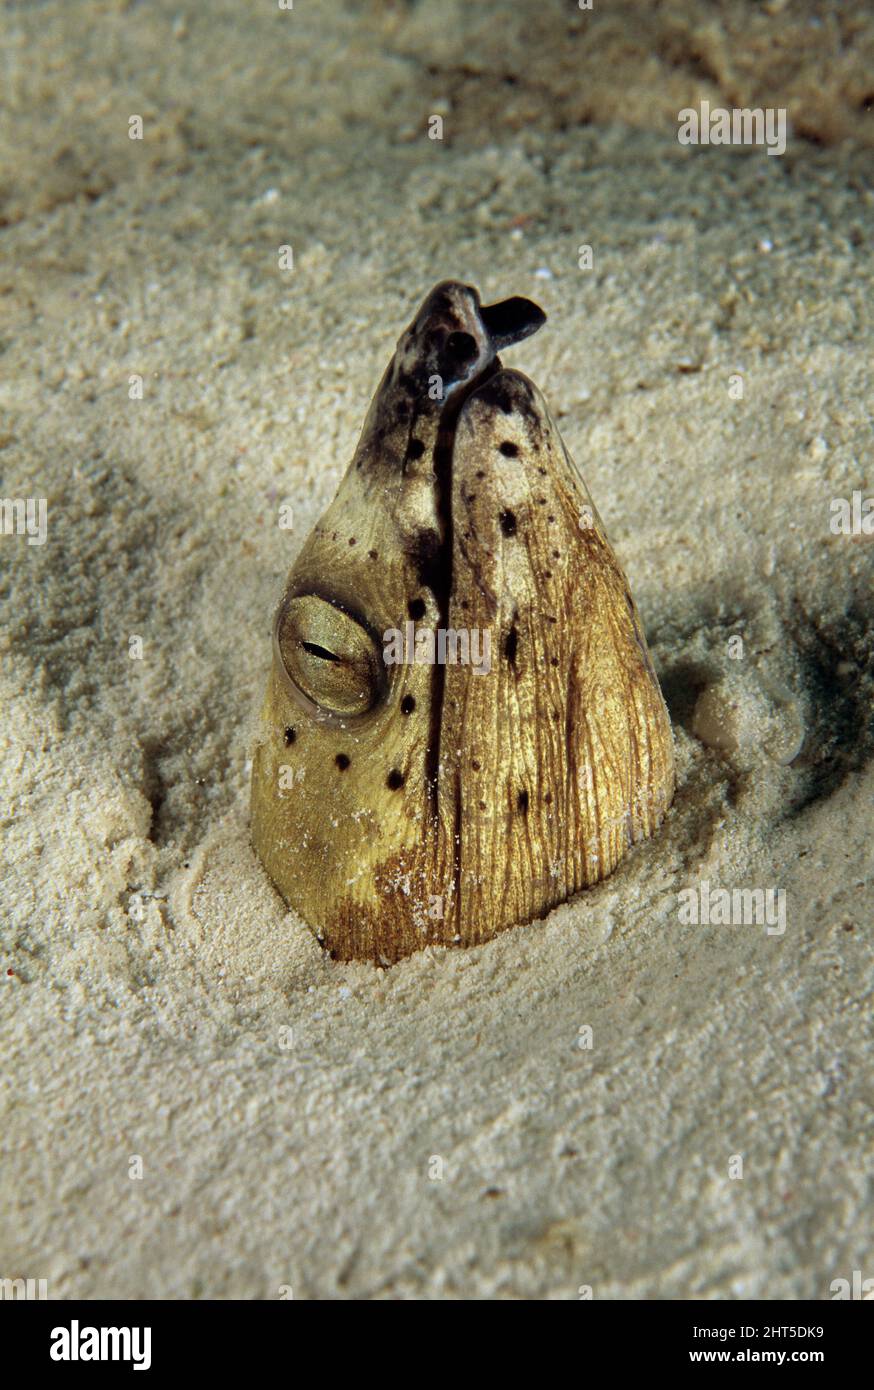 Snake eel (fam. Ophichthidae), with head emerging from sand. Stock Photo